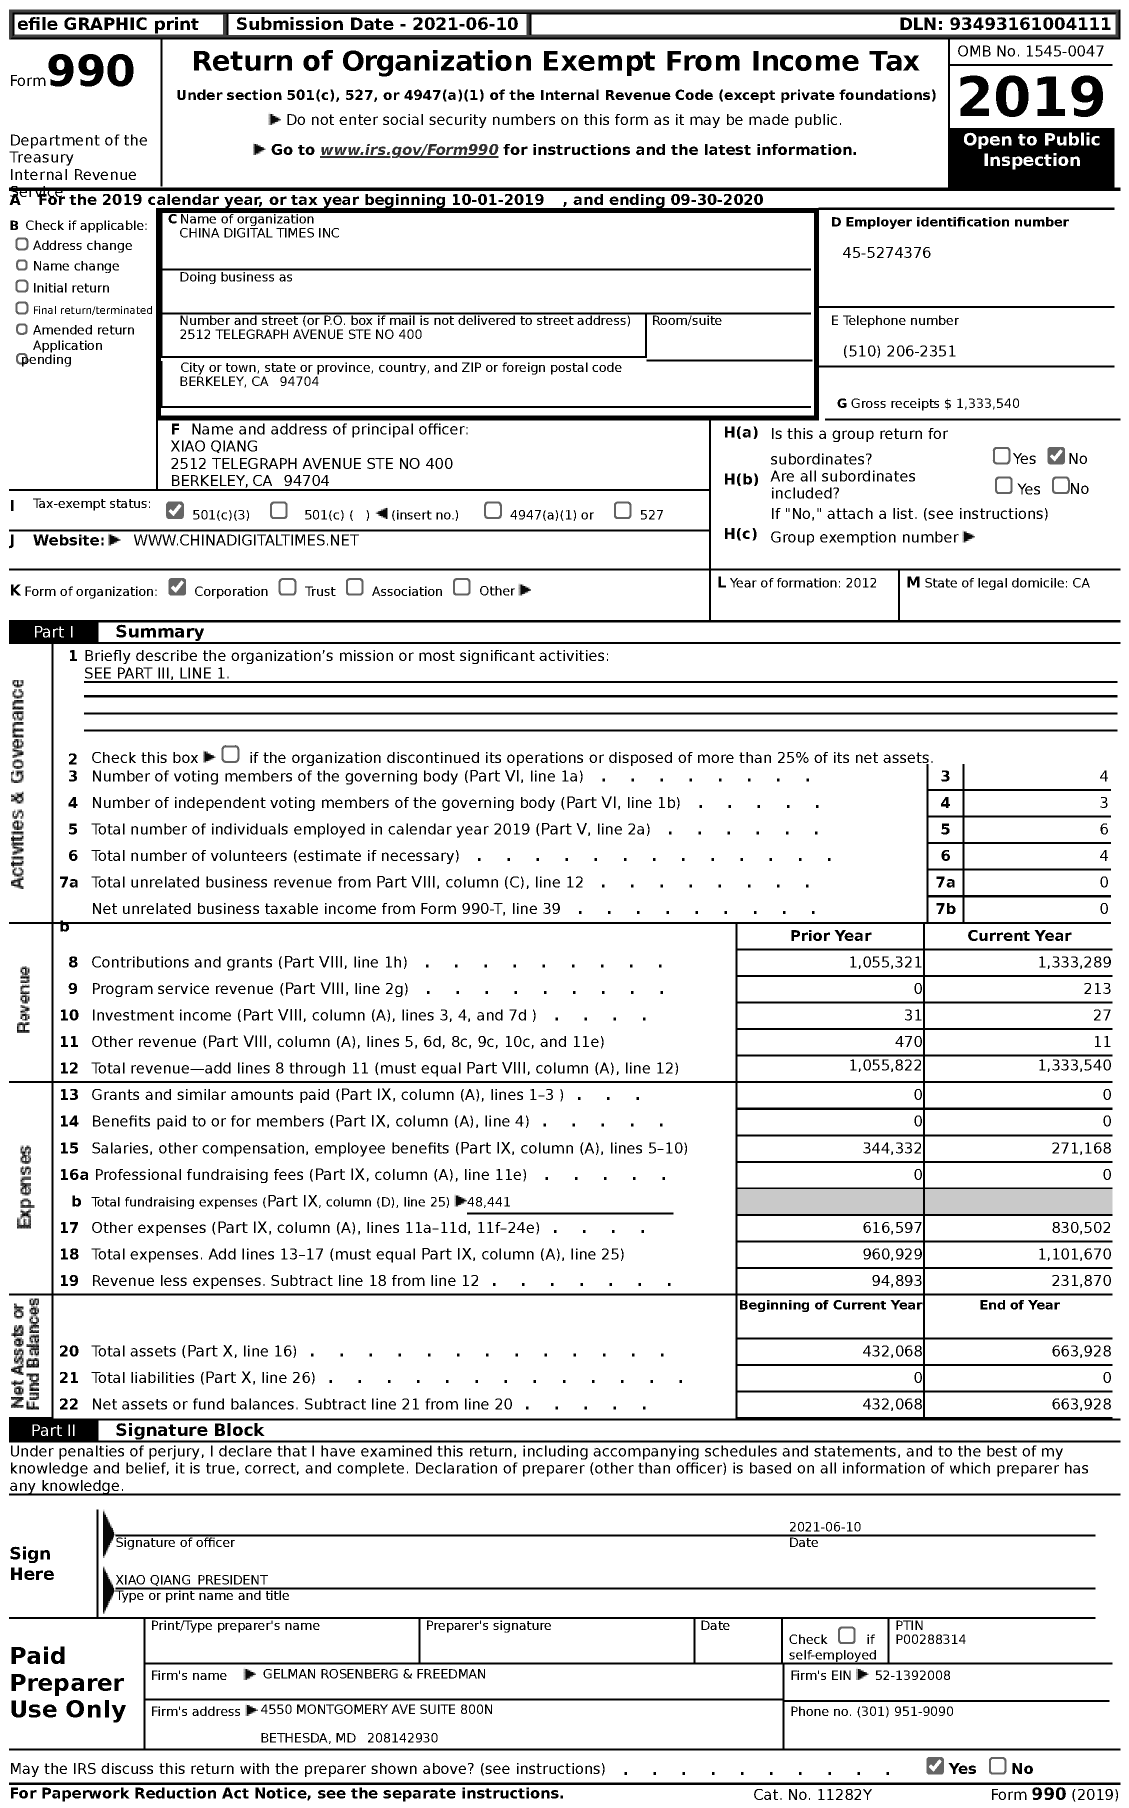 Image of first page of 2019 Form 990 for China Digital Times